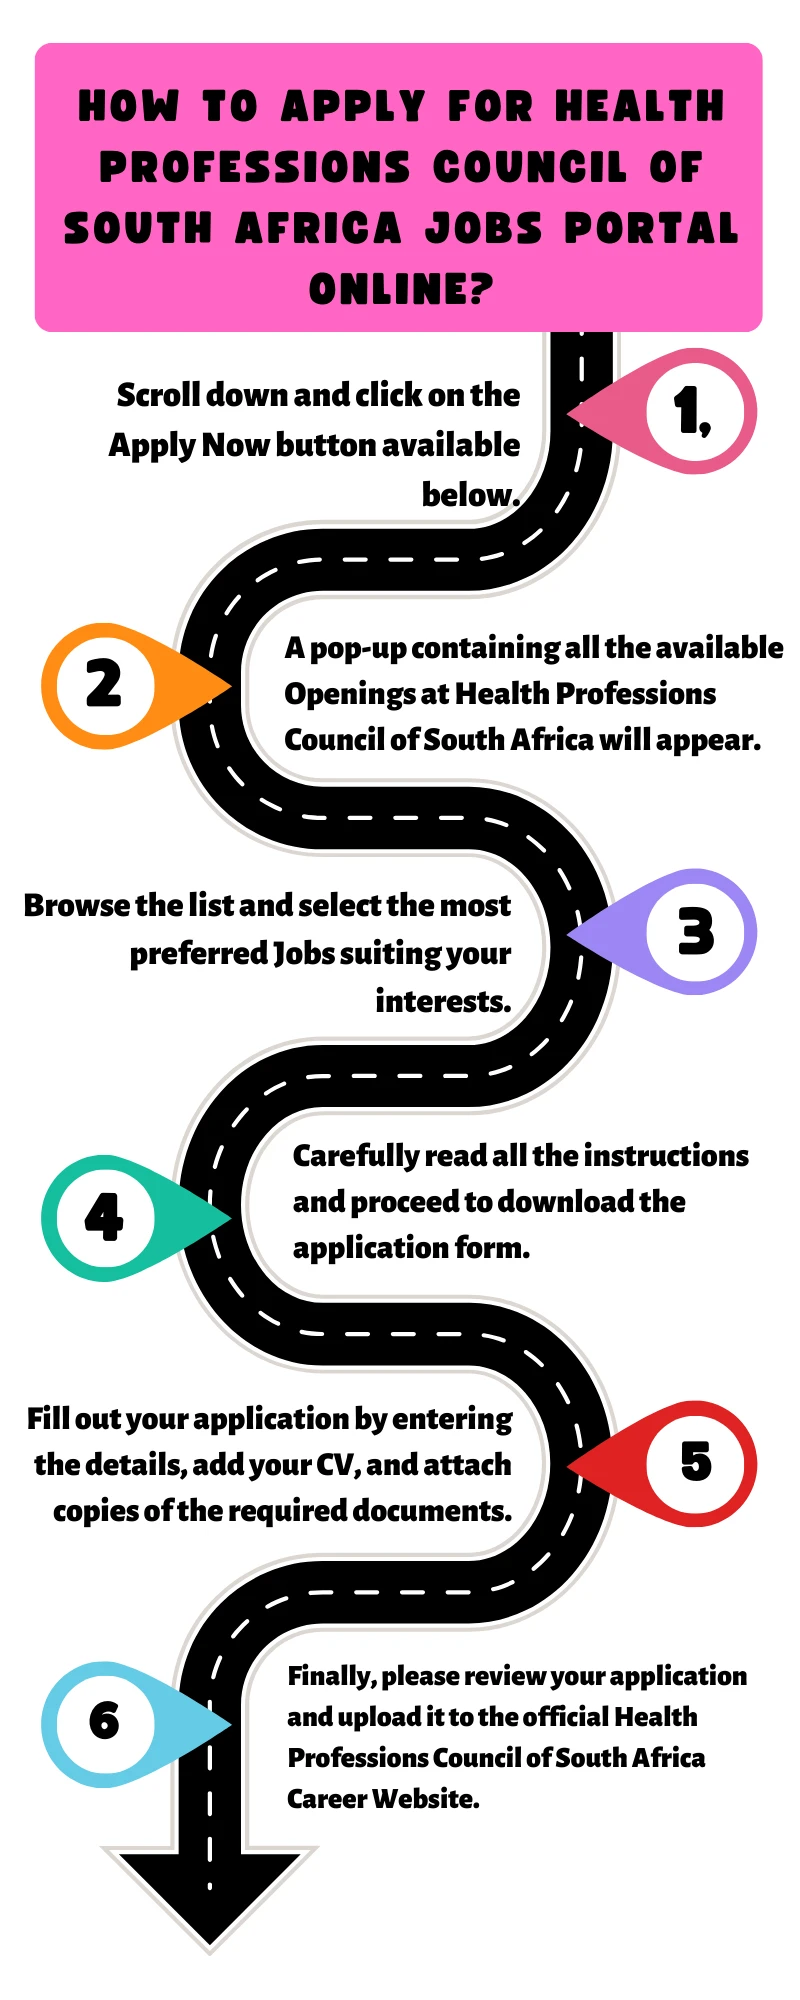 How To Apply for Health Professions Council of South Africa Jobs Portal Online?